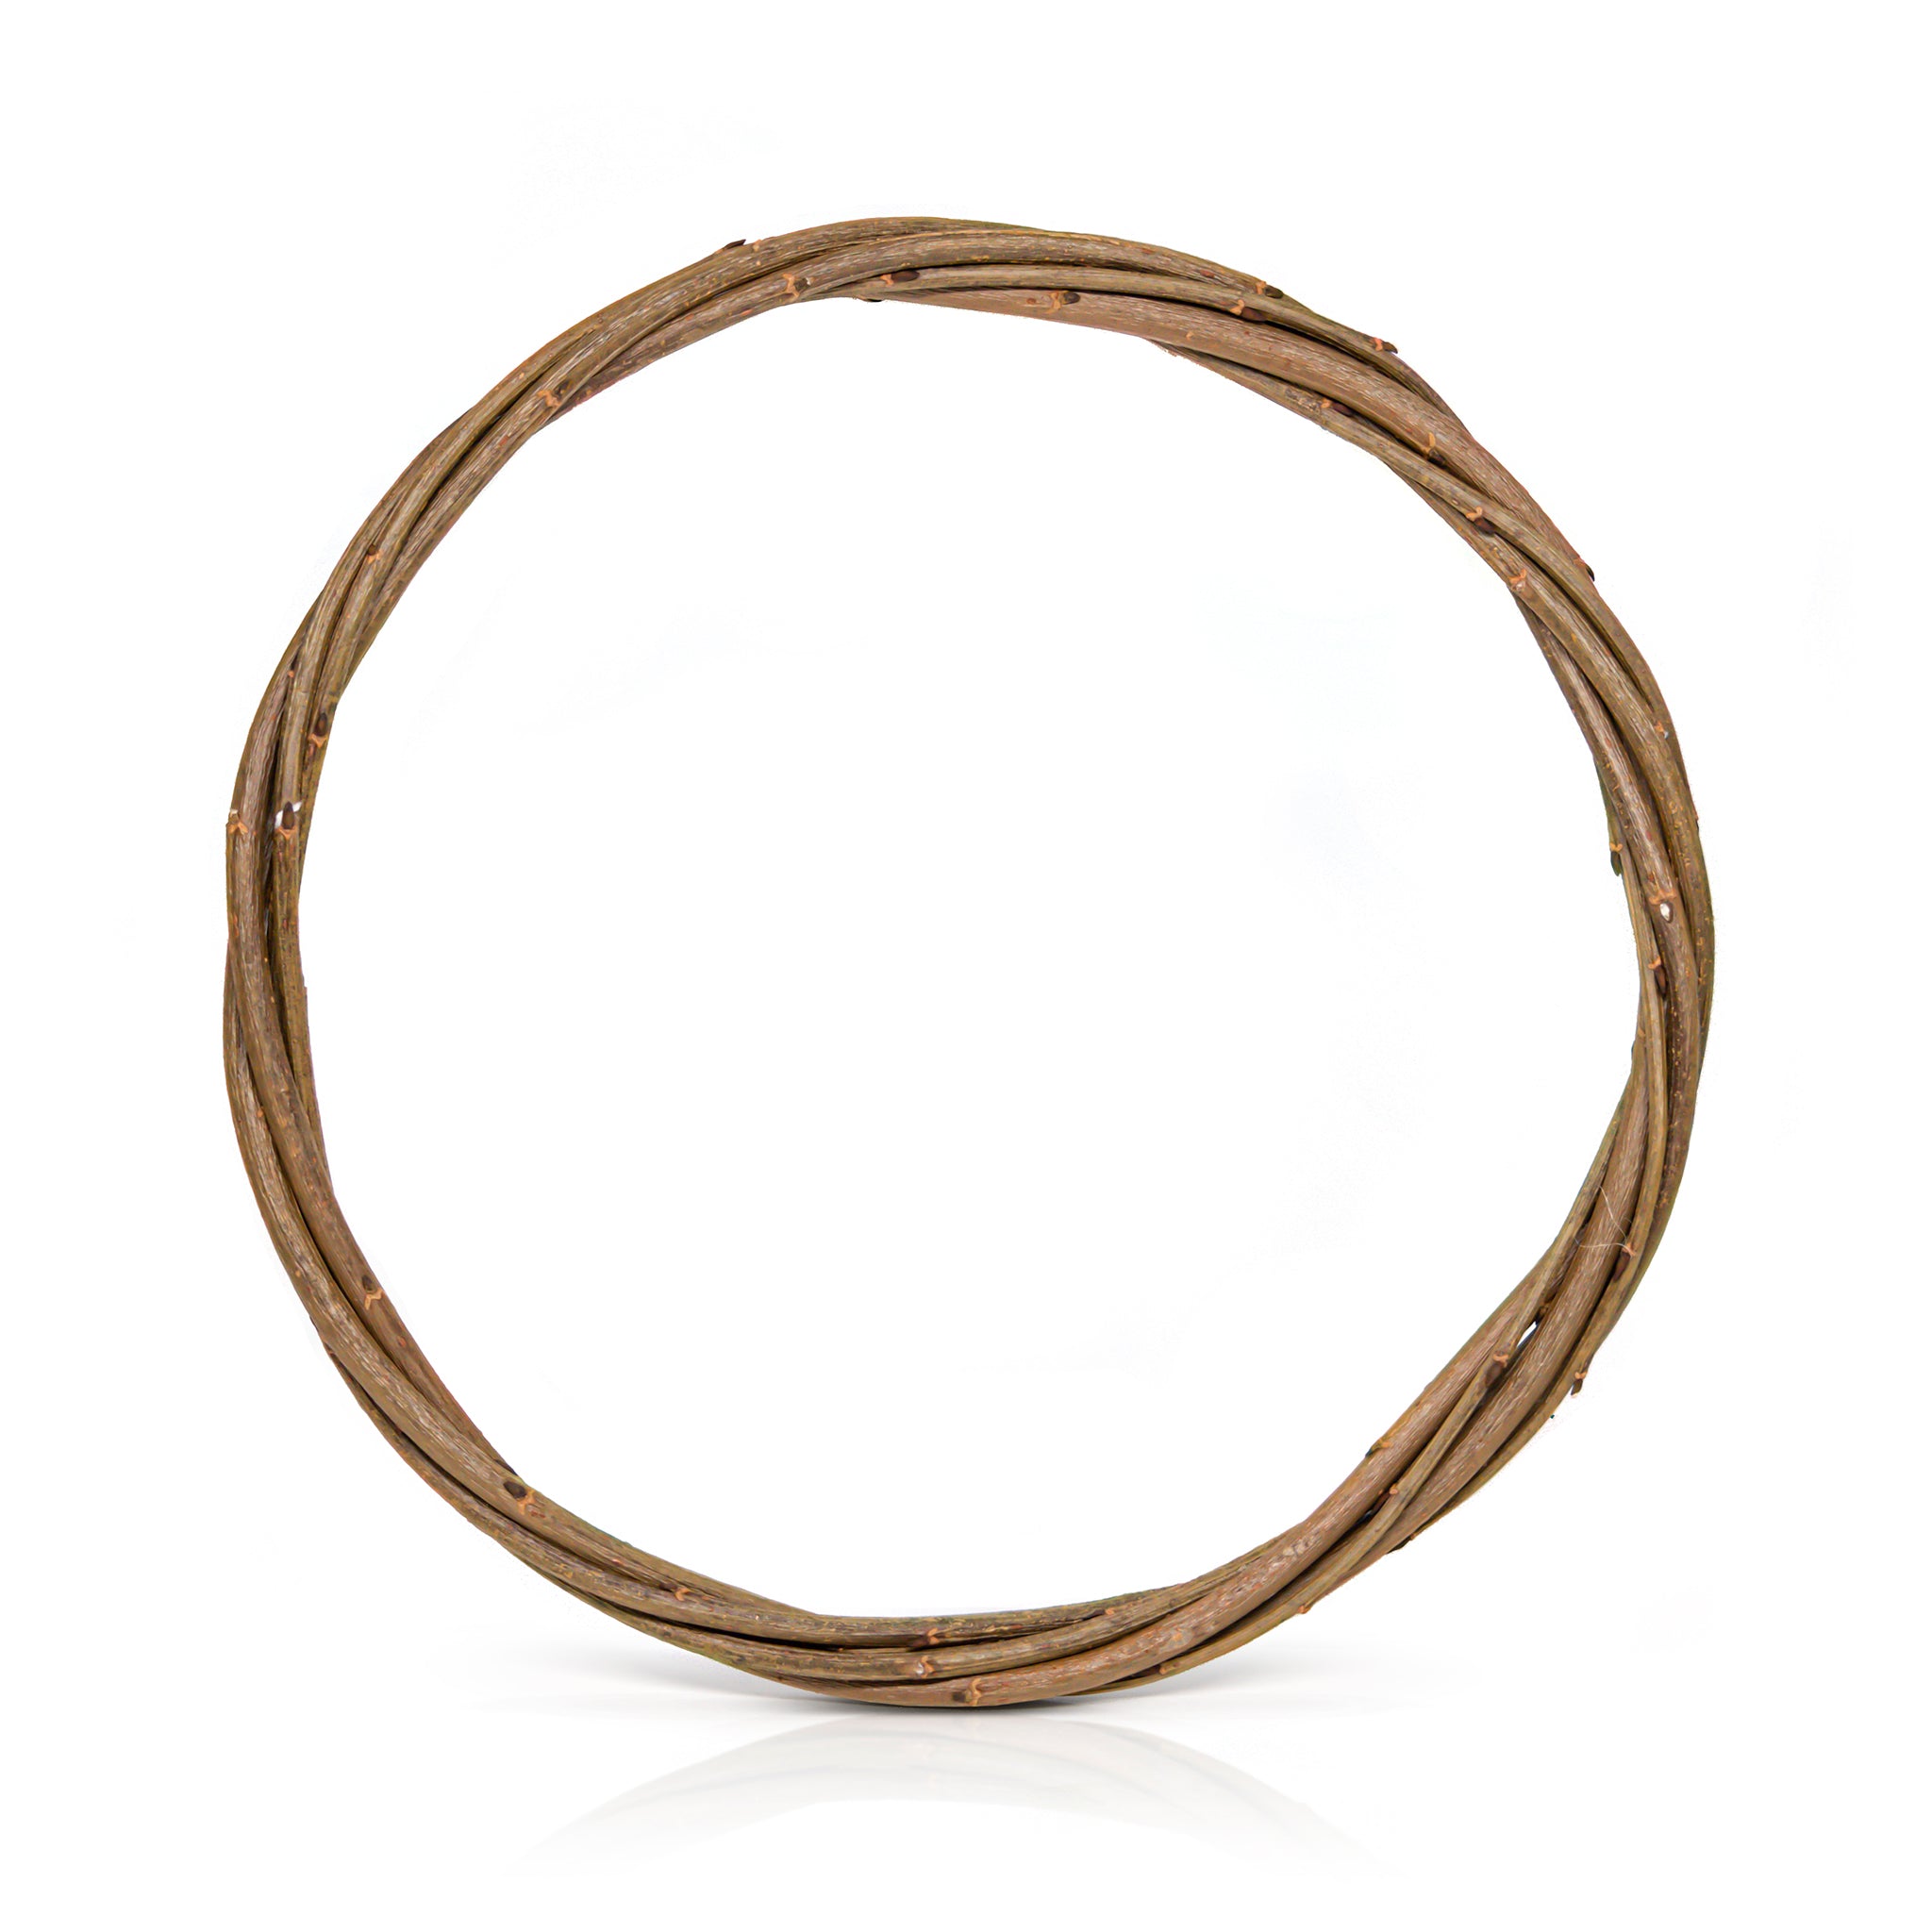 An intertwined brown willow wreath, stood on a white background